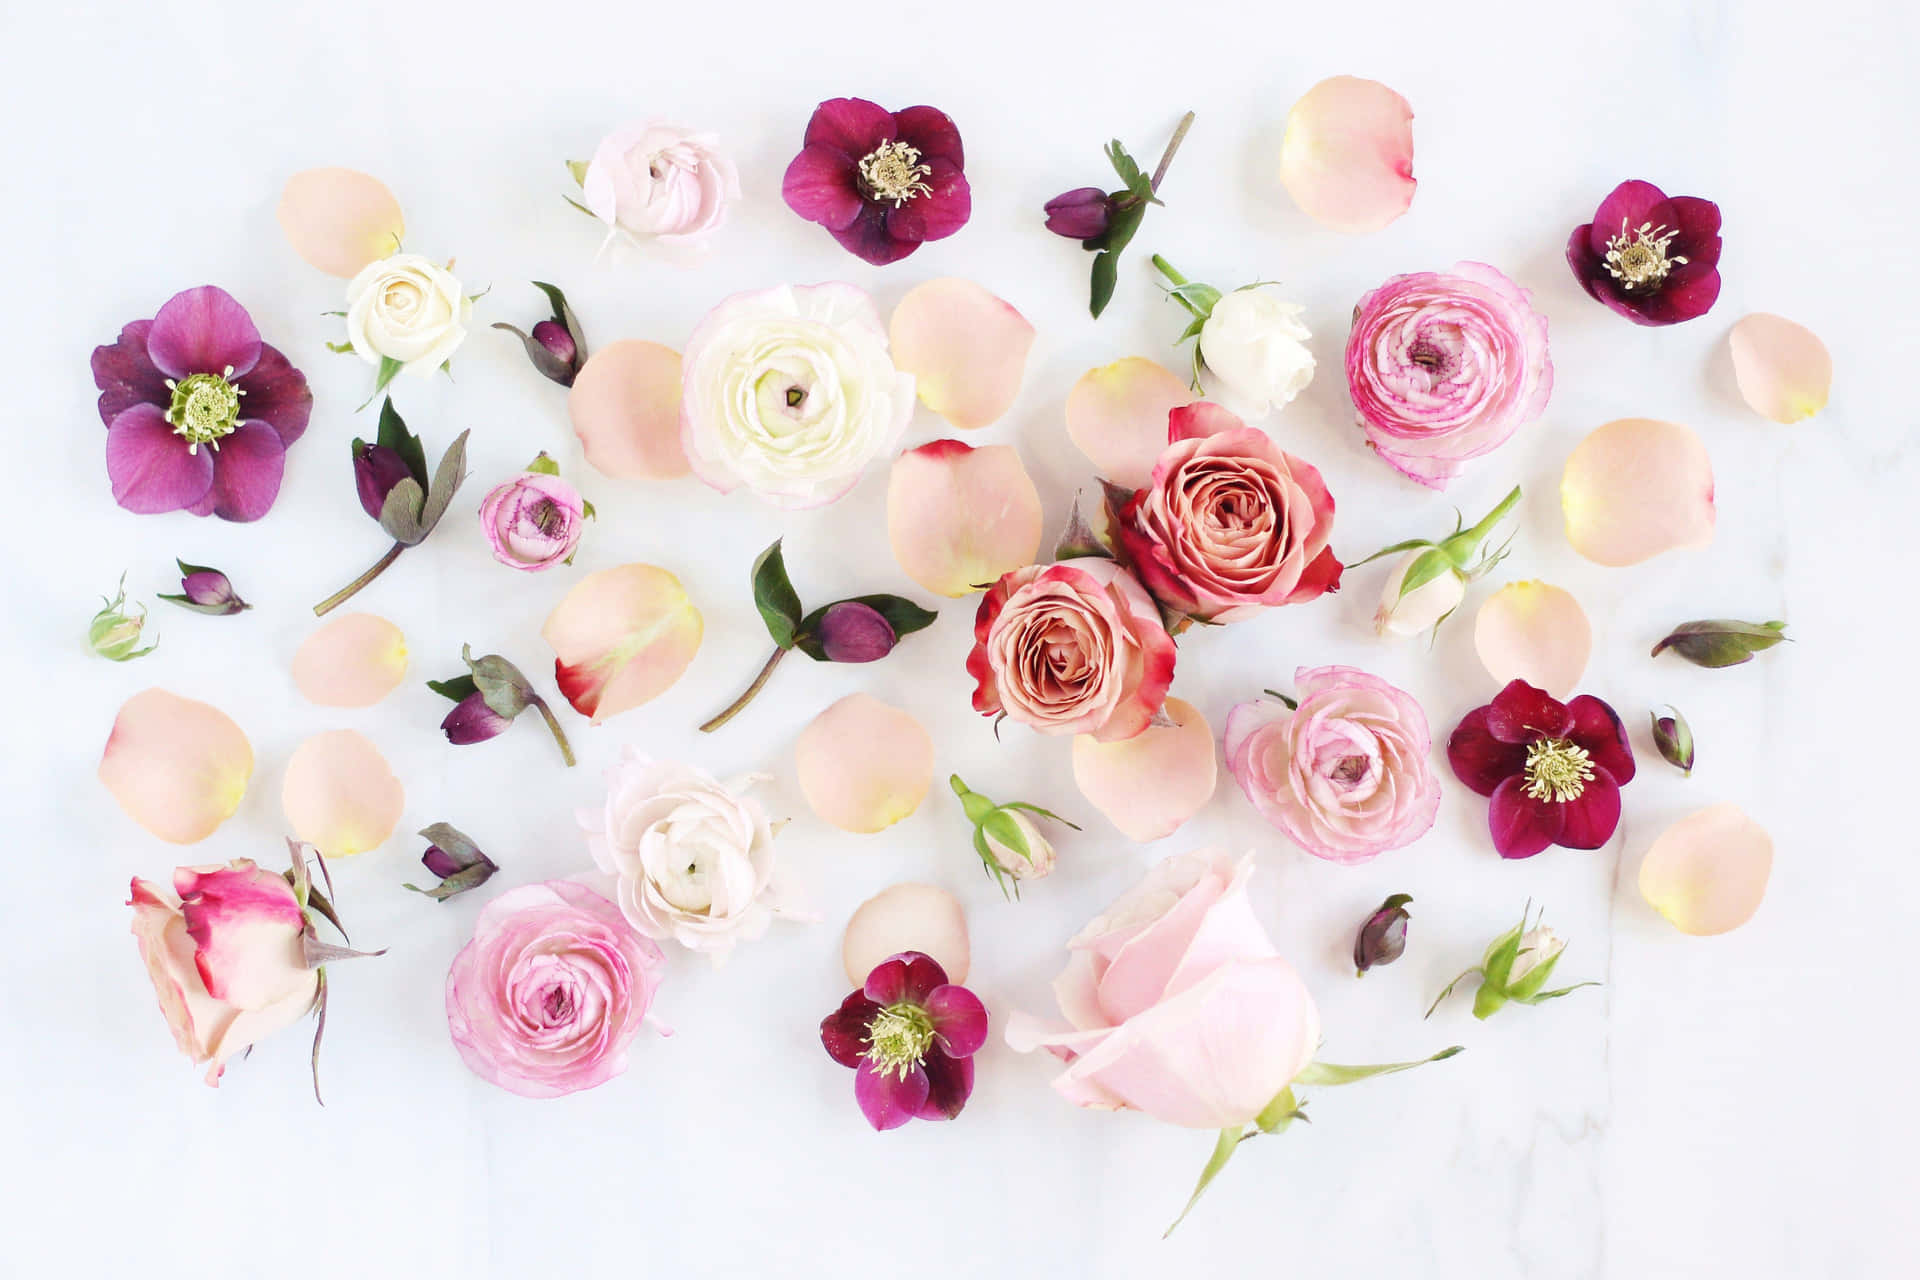 A Bouquet Of Pink And White Flowers On A White Background